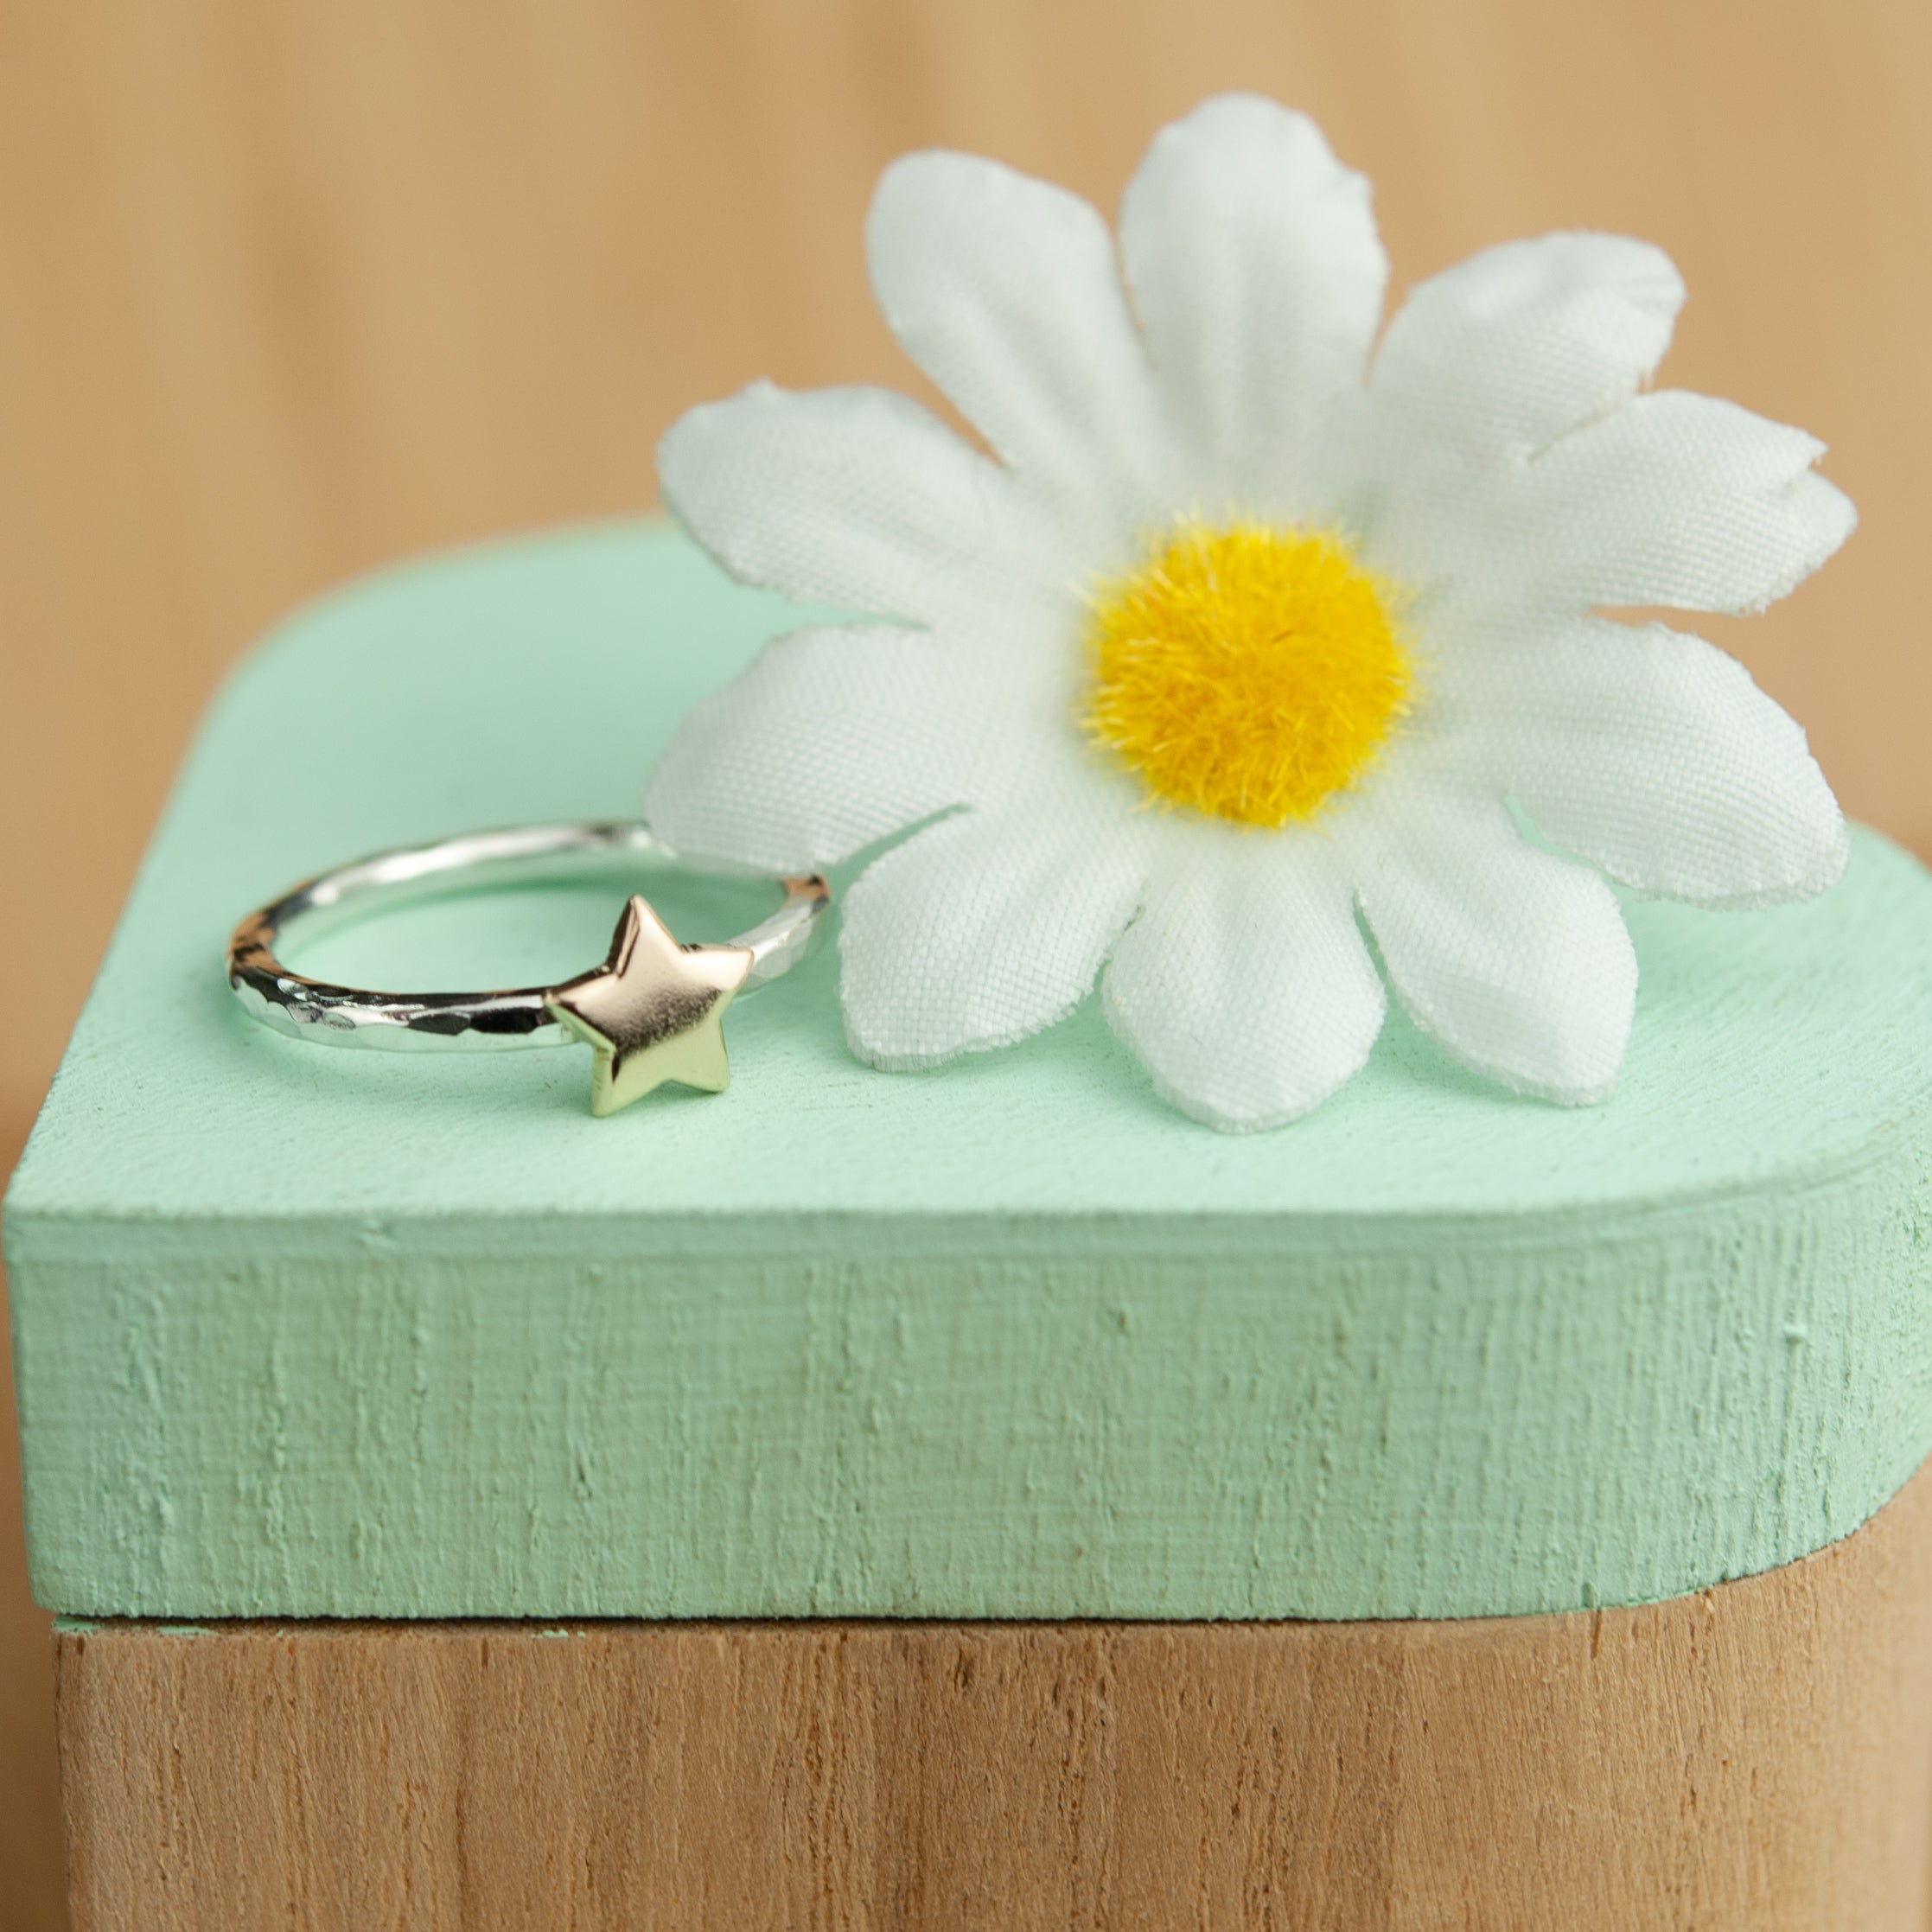 Belle & Bee Gold Star stack ring